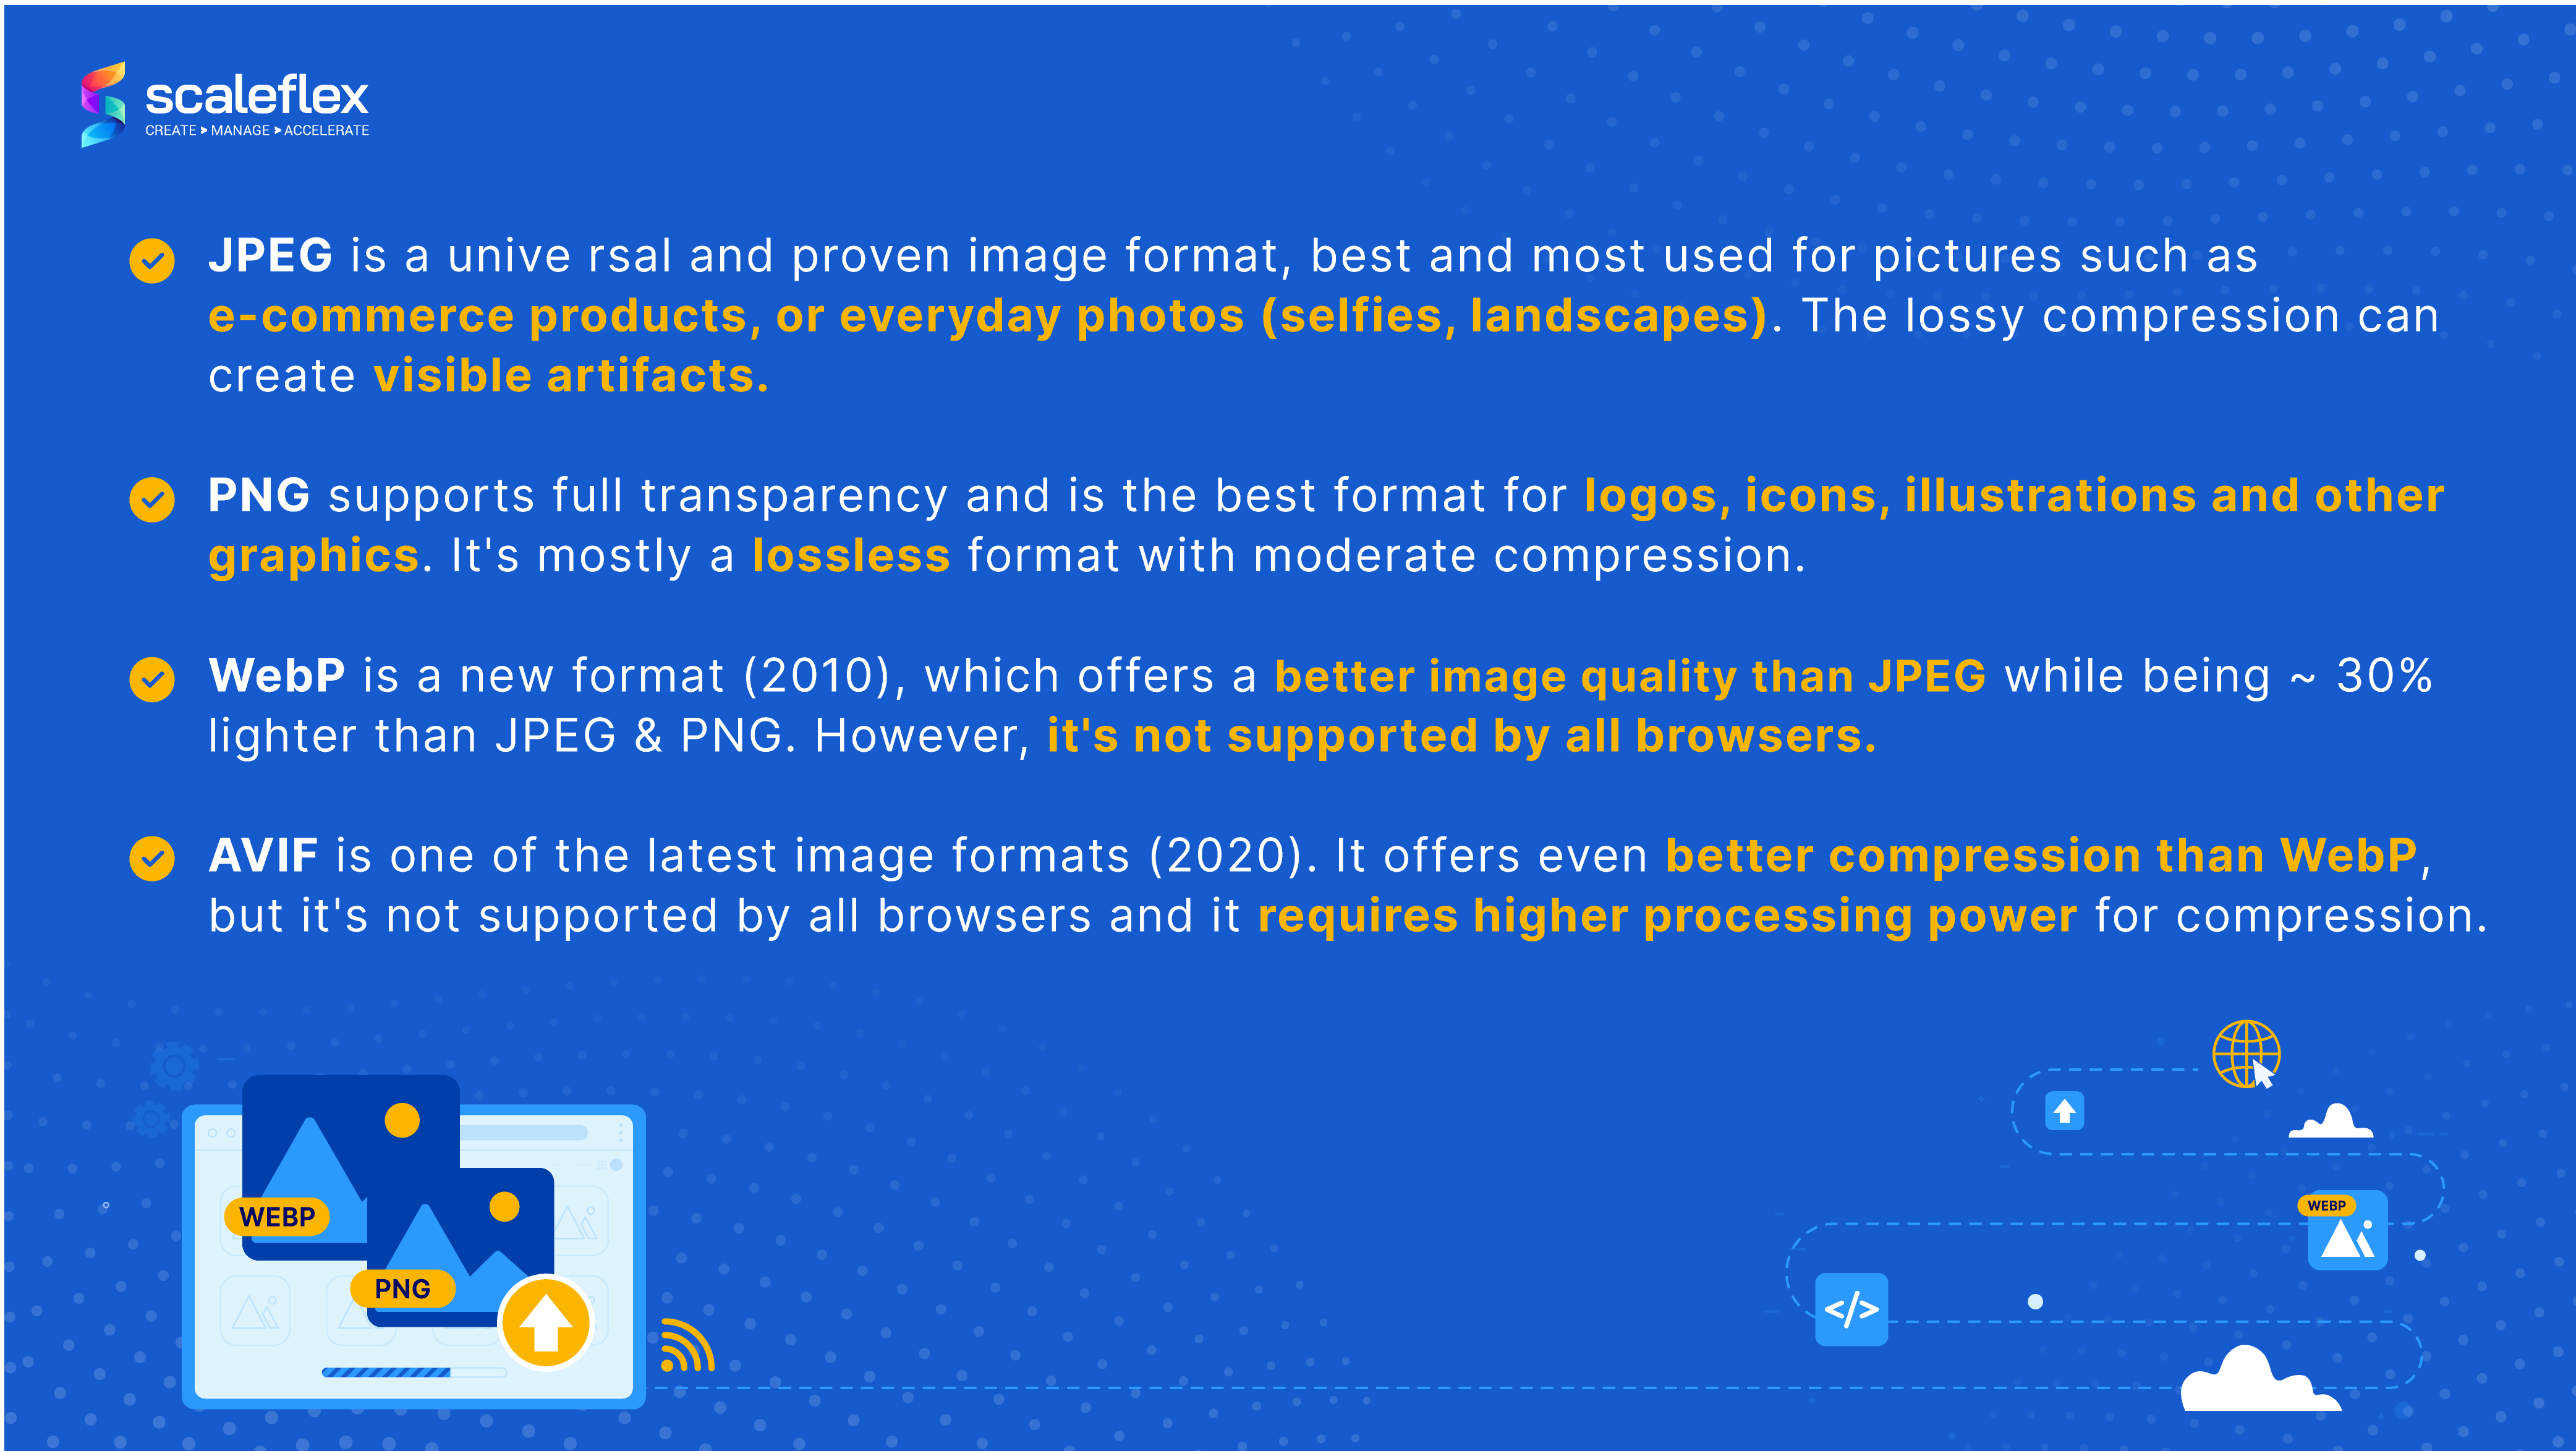 The overview of specs about file formats including PNG, WebP, AVIF or AV1